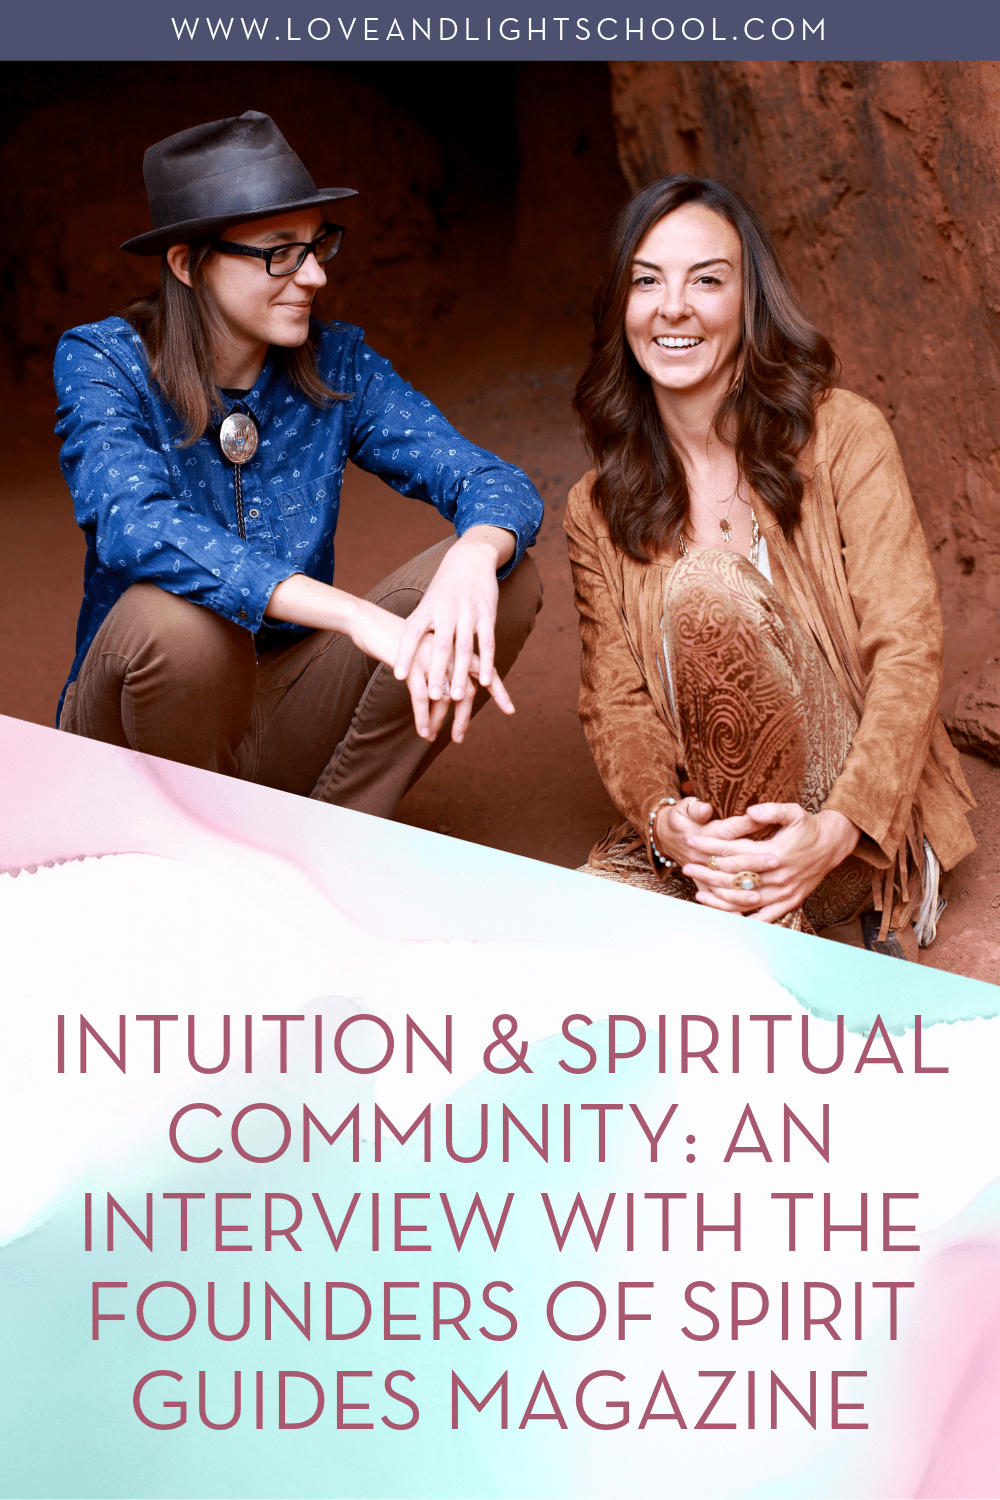 Intuition & Spiritual Community: An Interview with the Founders of Spirit Guides Magazine